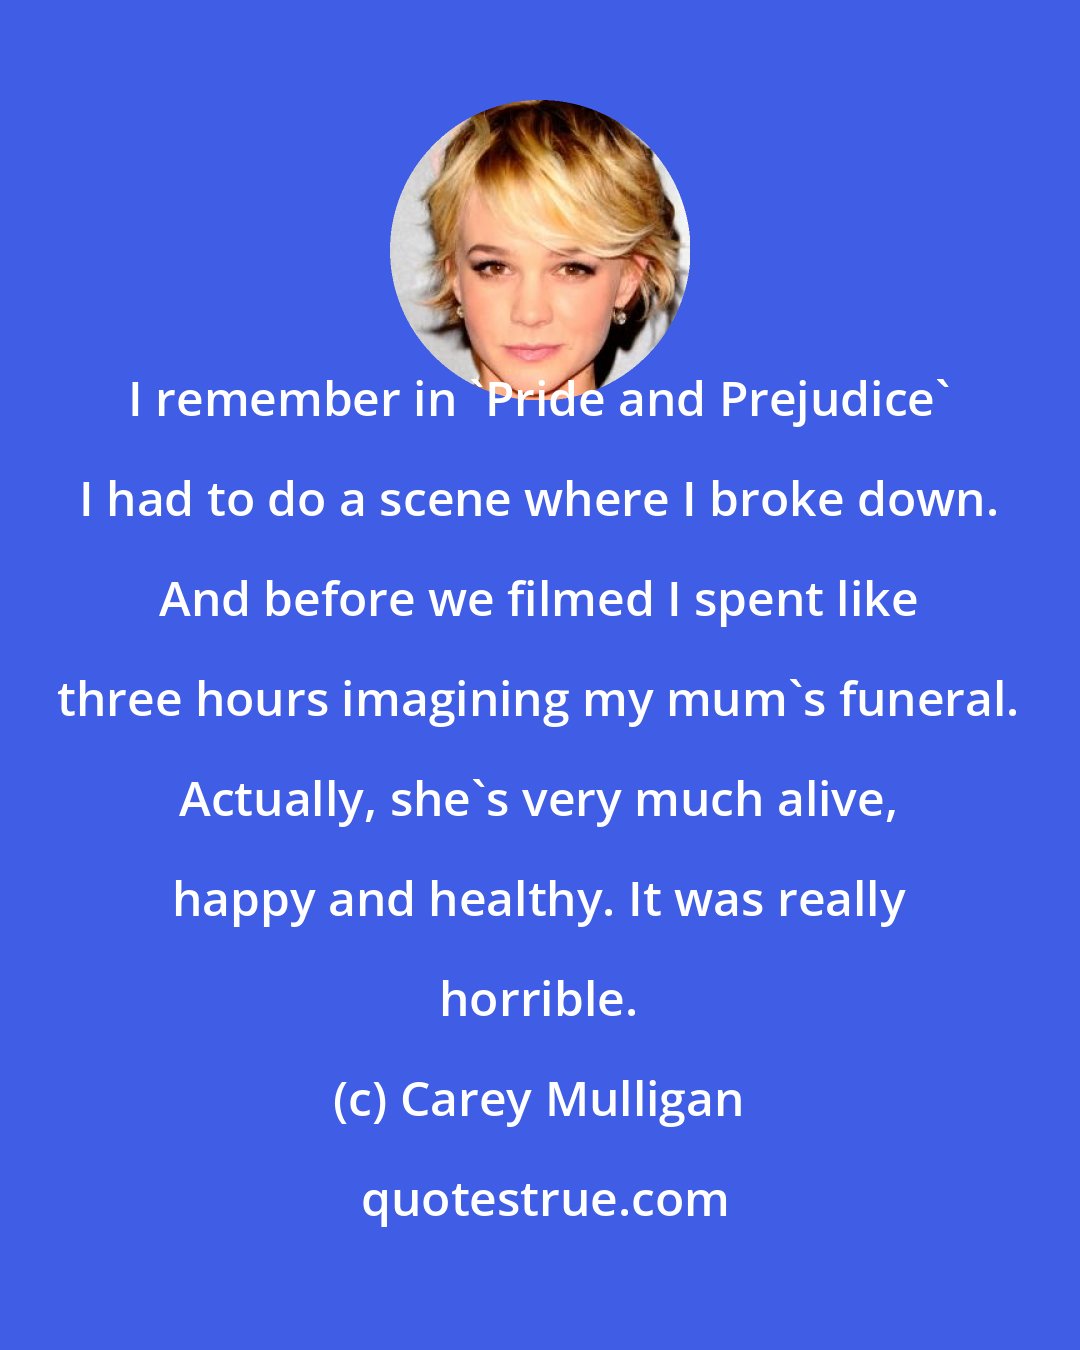 Carey Mulligan: I remember in 'Pride and Prejudice' I had to do a scene where I broke down. And before we filmed I spent like three hours imagining my mum's funeral. Actually, she's very much alive, happy and healthy. It was really horrible.